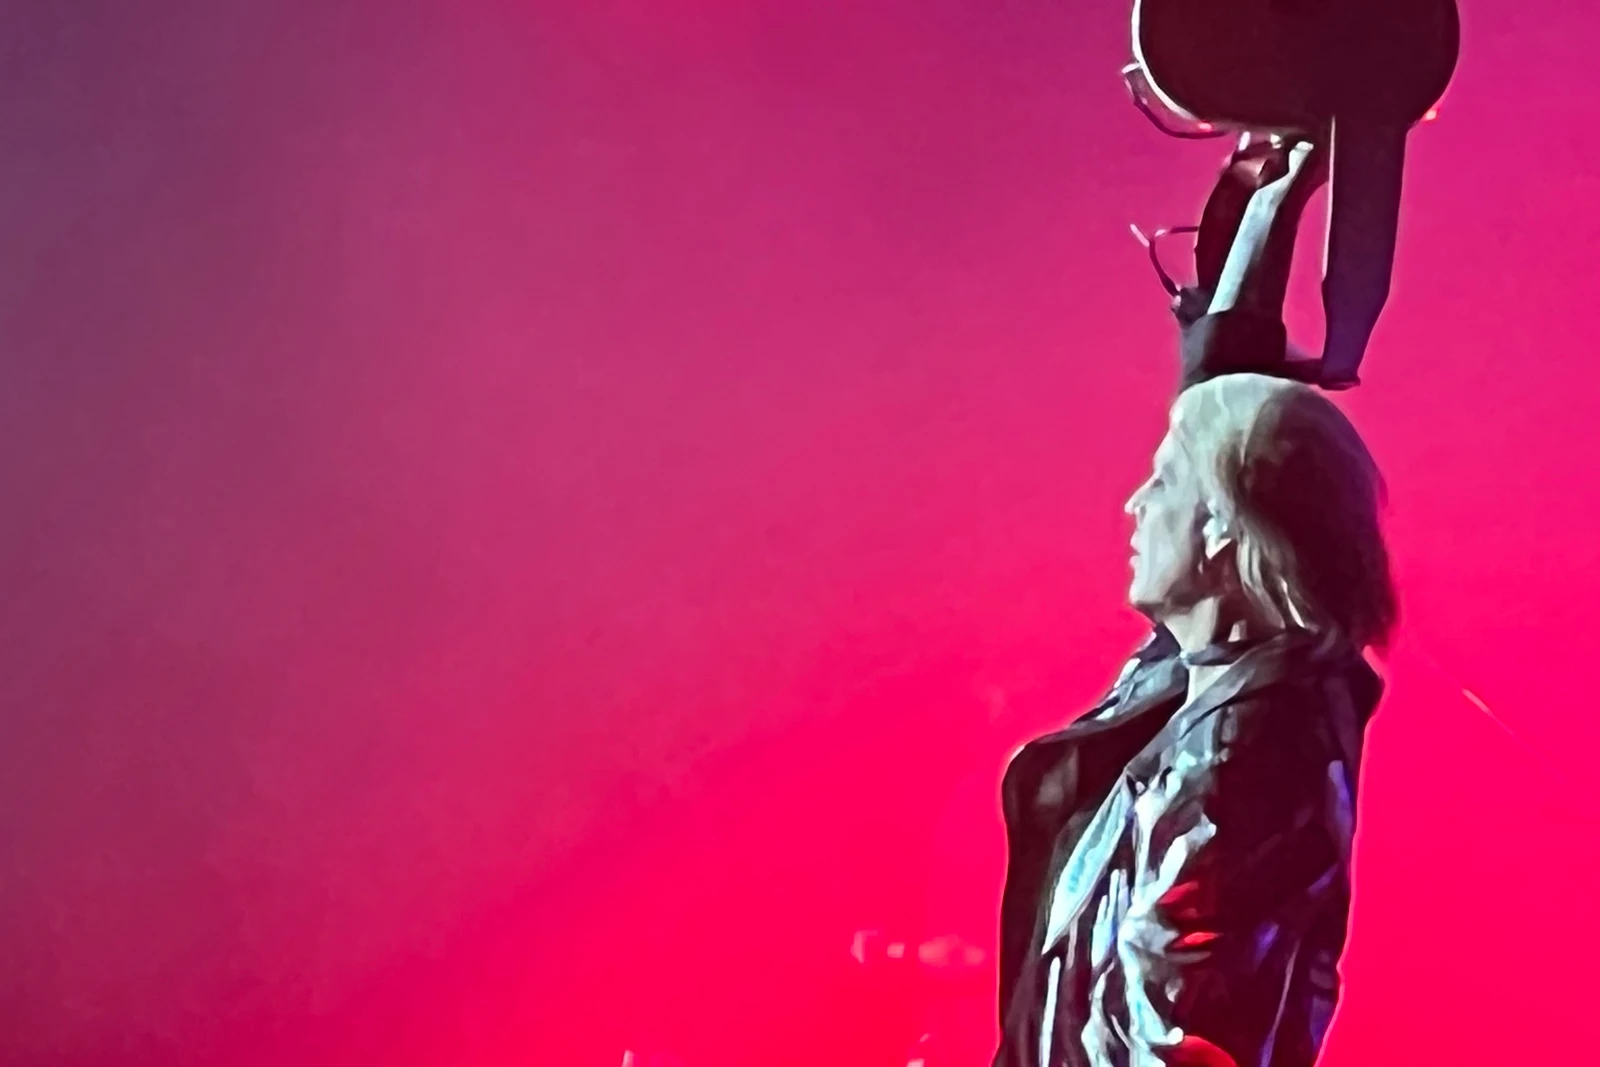 Watch Motley Crue Play Their First Show With New Guitarist John 5